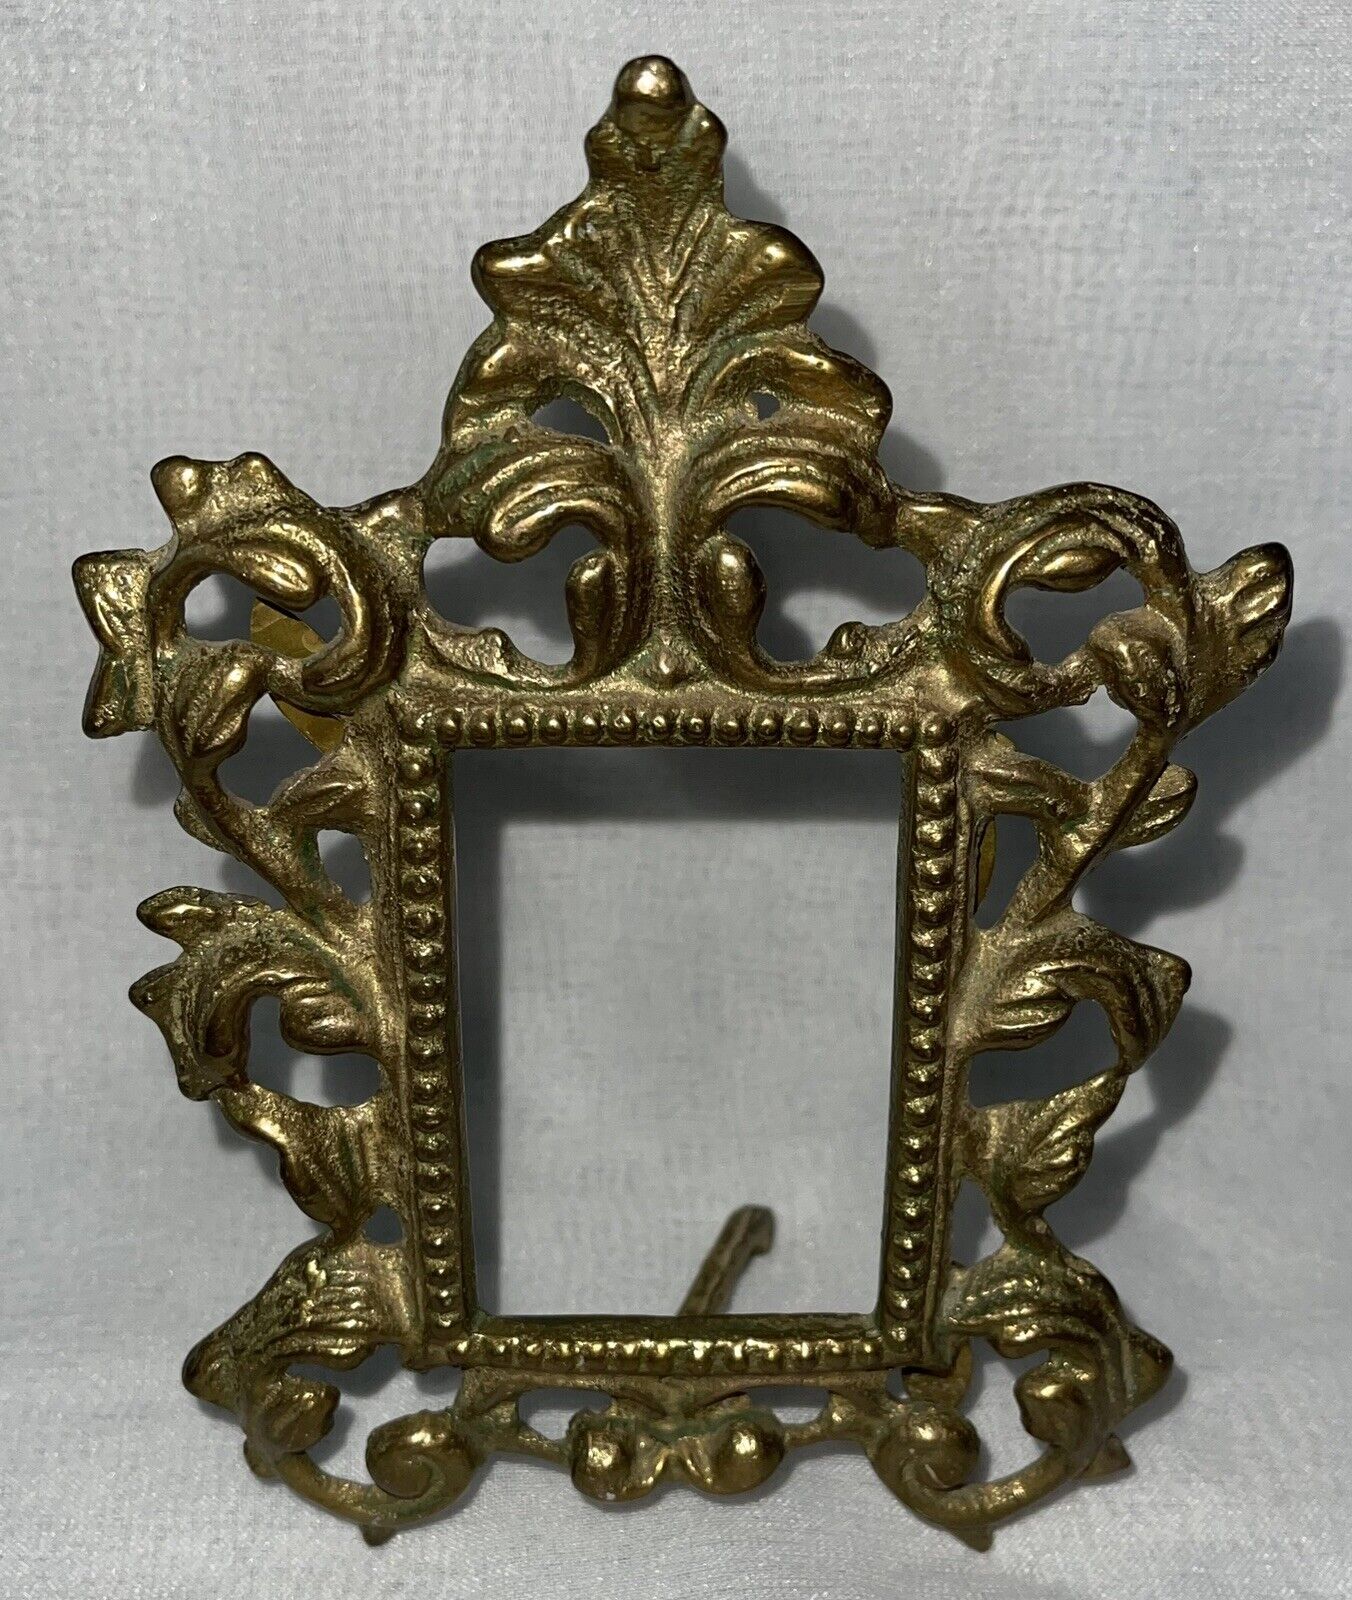 VTG Ornate Gold Metal Picture Frame Rococo Kickstand Table Top 6.5” No Glass